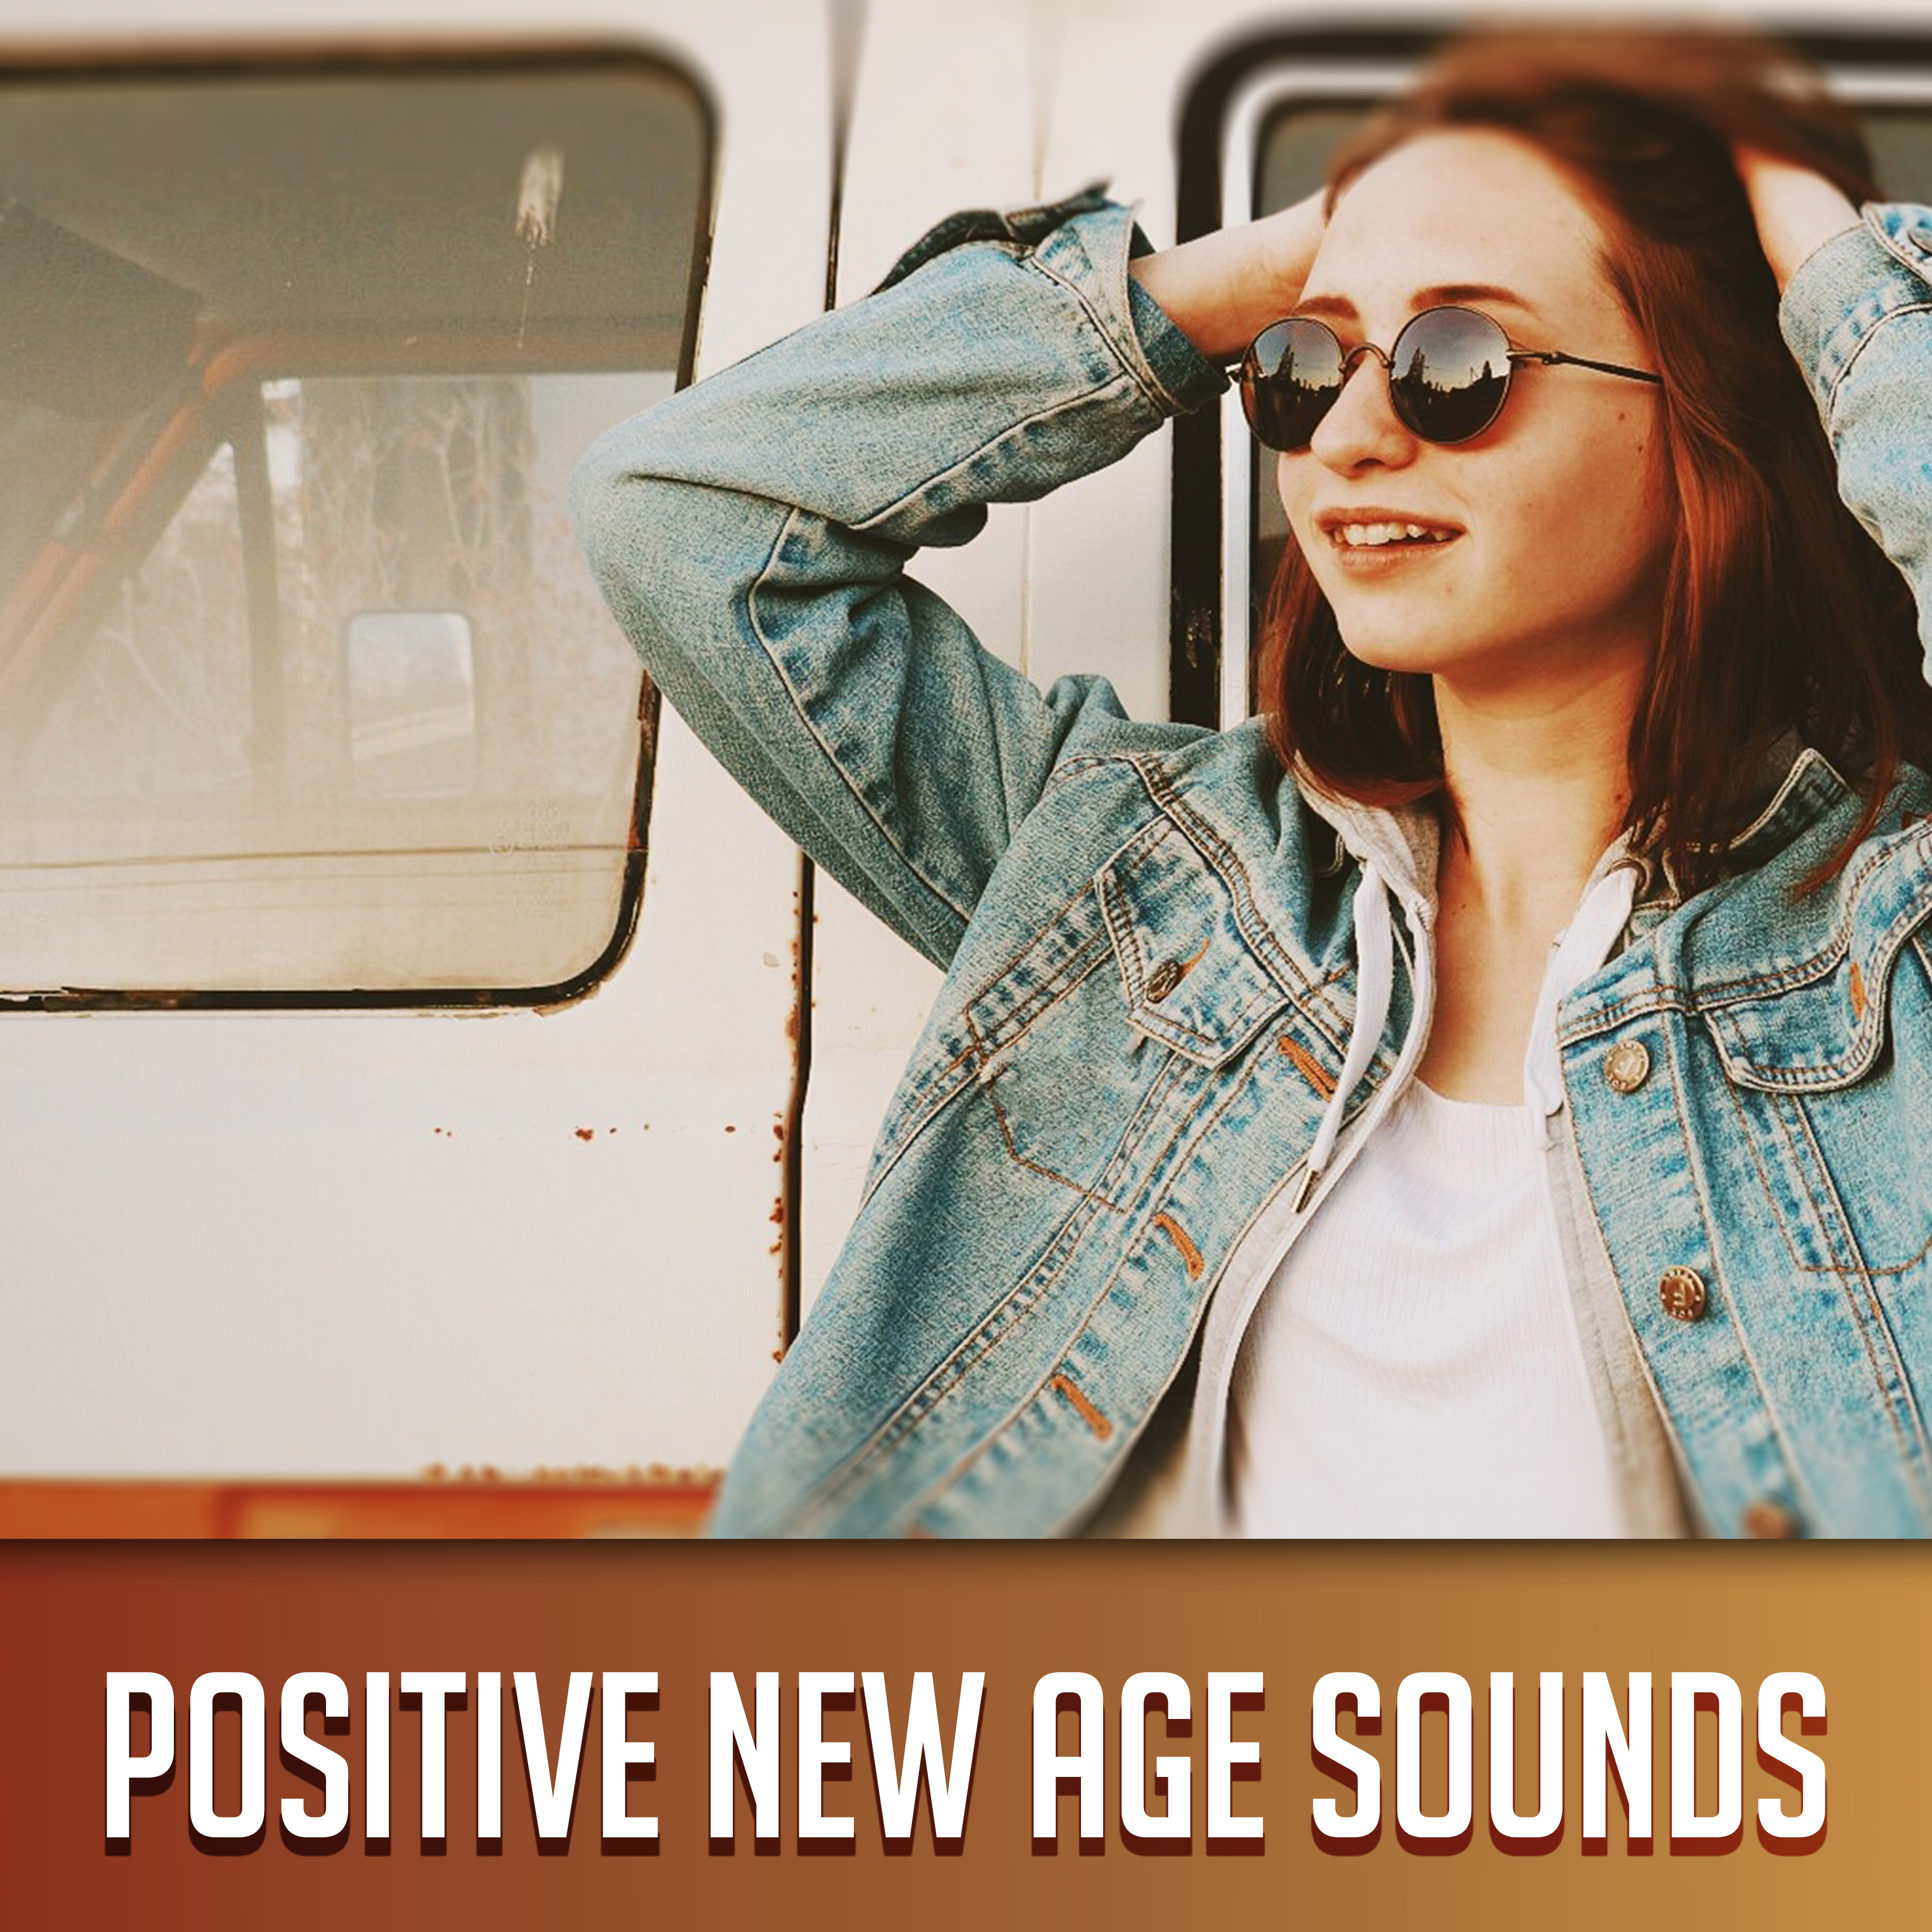 Positive New Age Sounds – Relaxing Waves, Soothing Sounds, Positive Music, Calm New Age, Rest Yourself